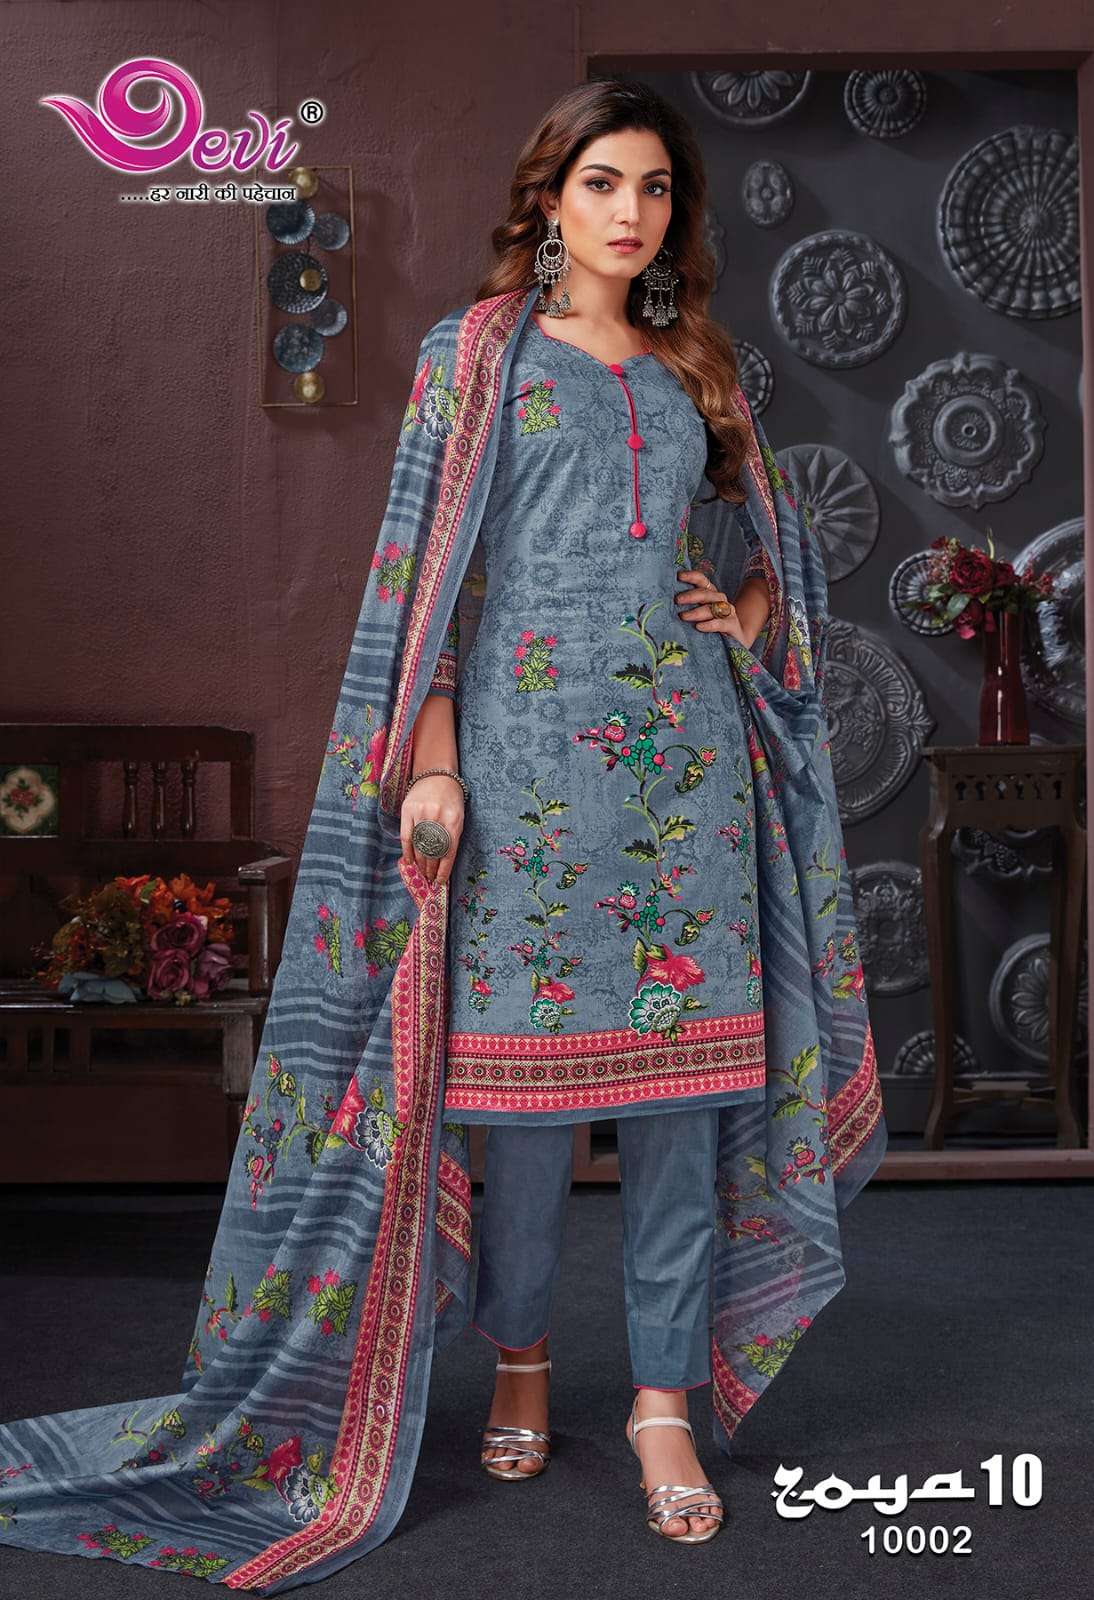 Zoya Vol-10 By Devi 10001 To 10012 Series Beautiful Festive Suits Colorful Stylish Fancy Casual Wear & Ethnic Wear Soft Cotton Print Dresses At Wholesale Price